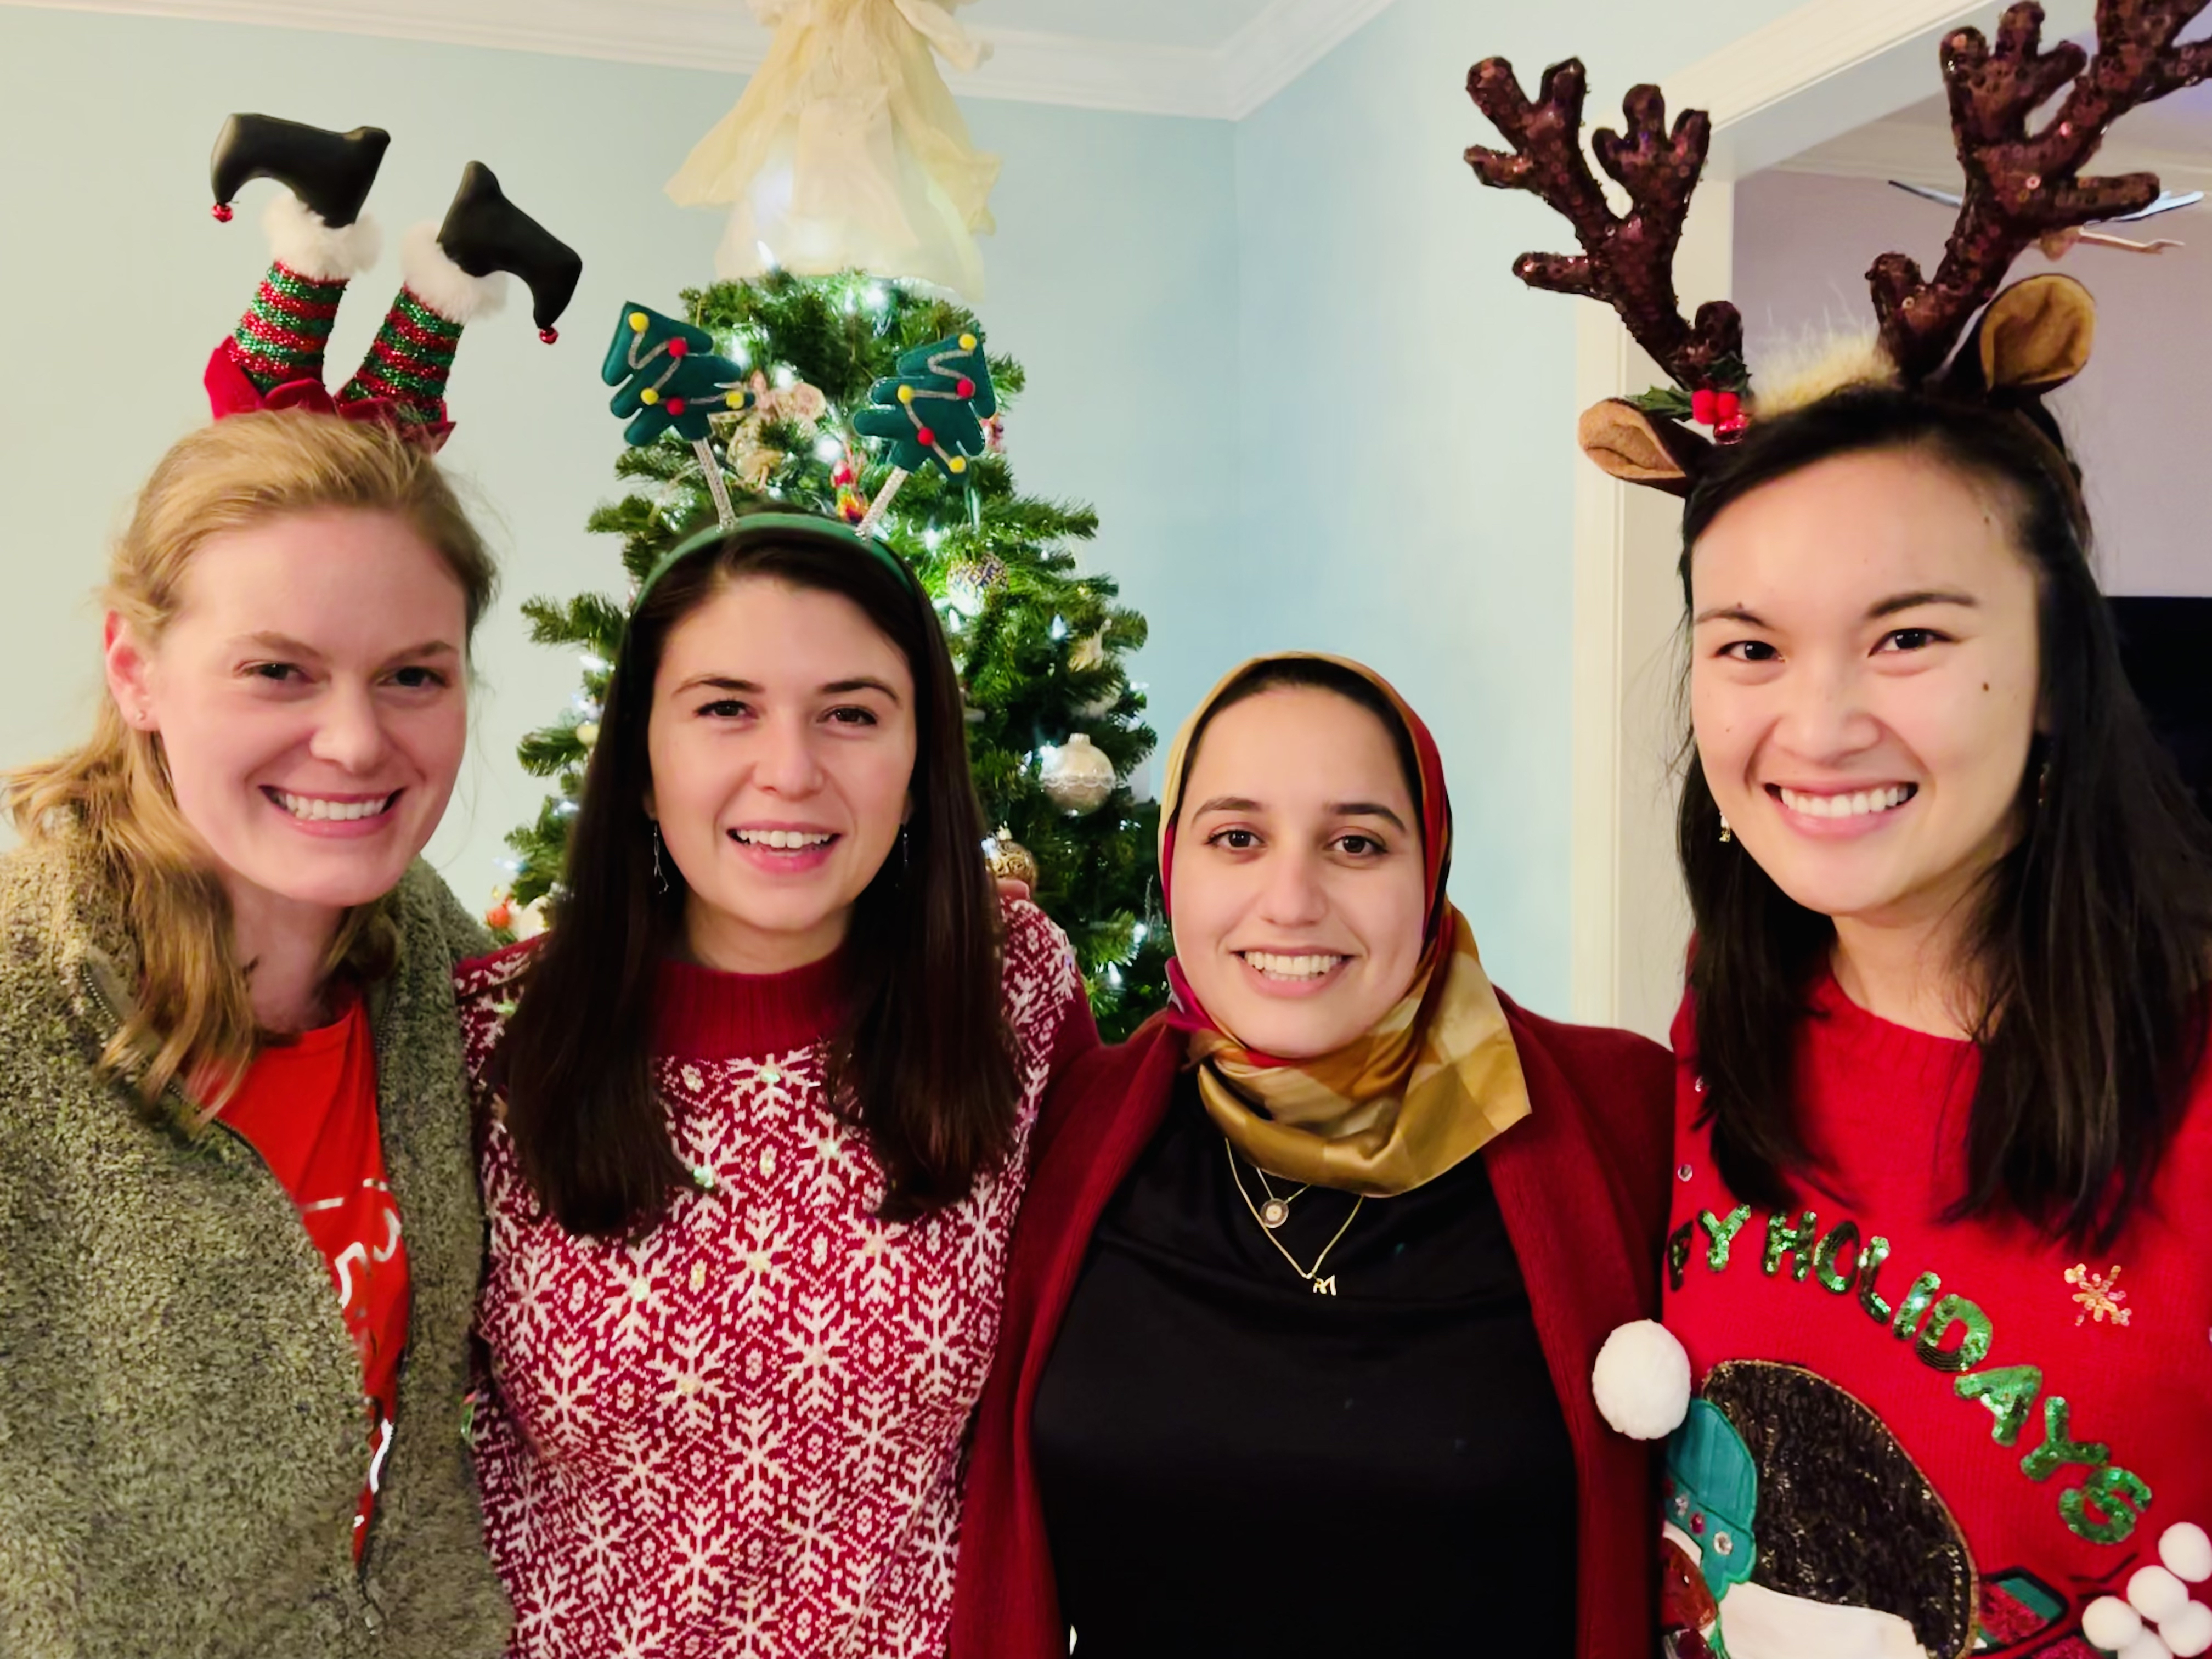 Female residents pose with holiday headbands